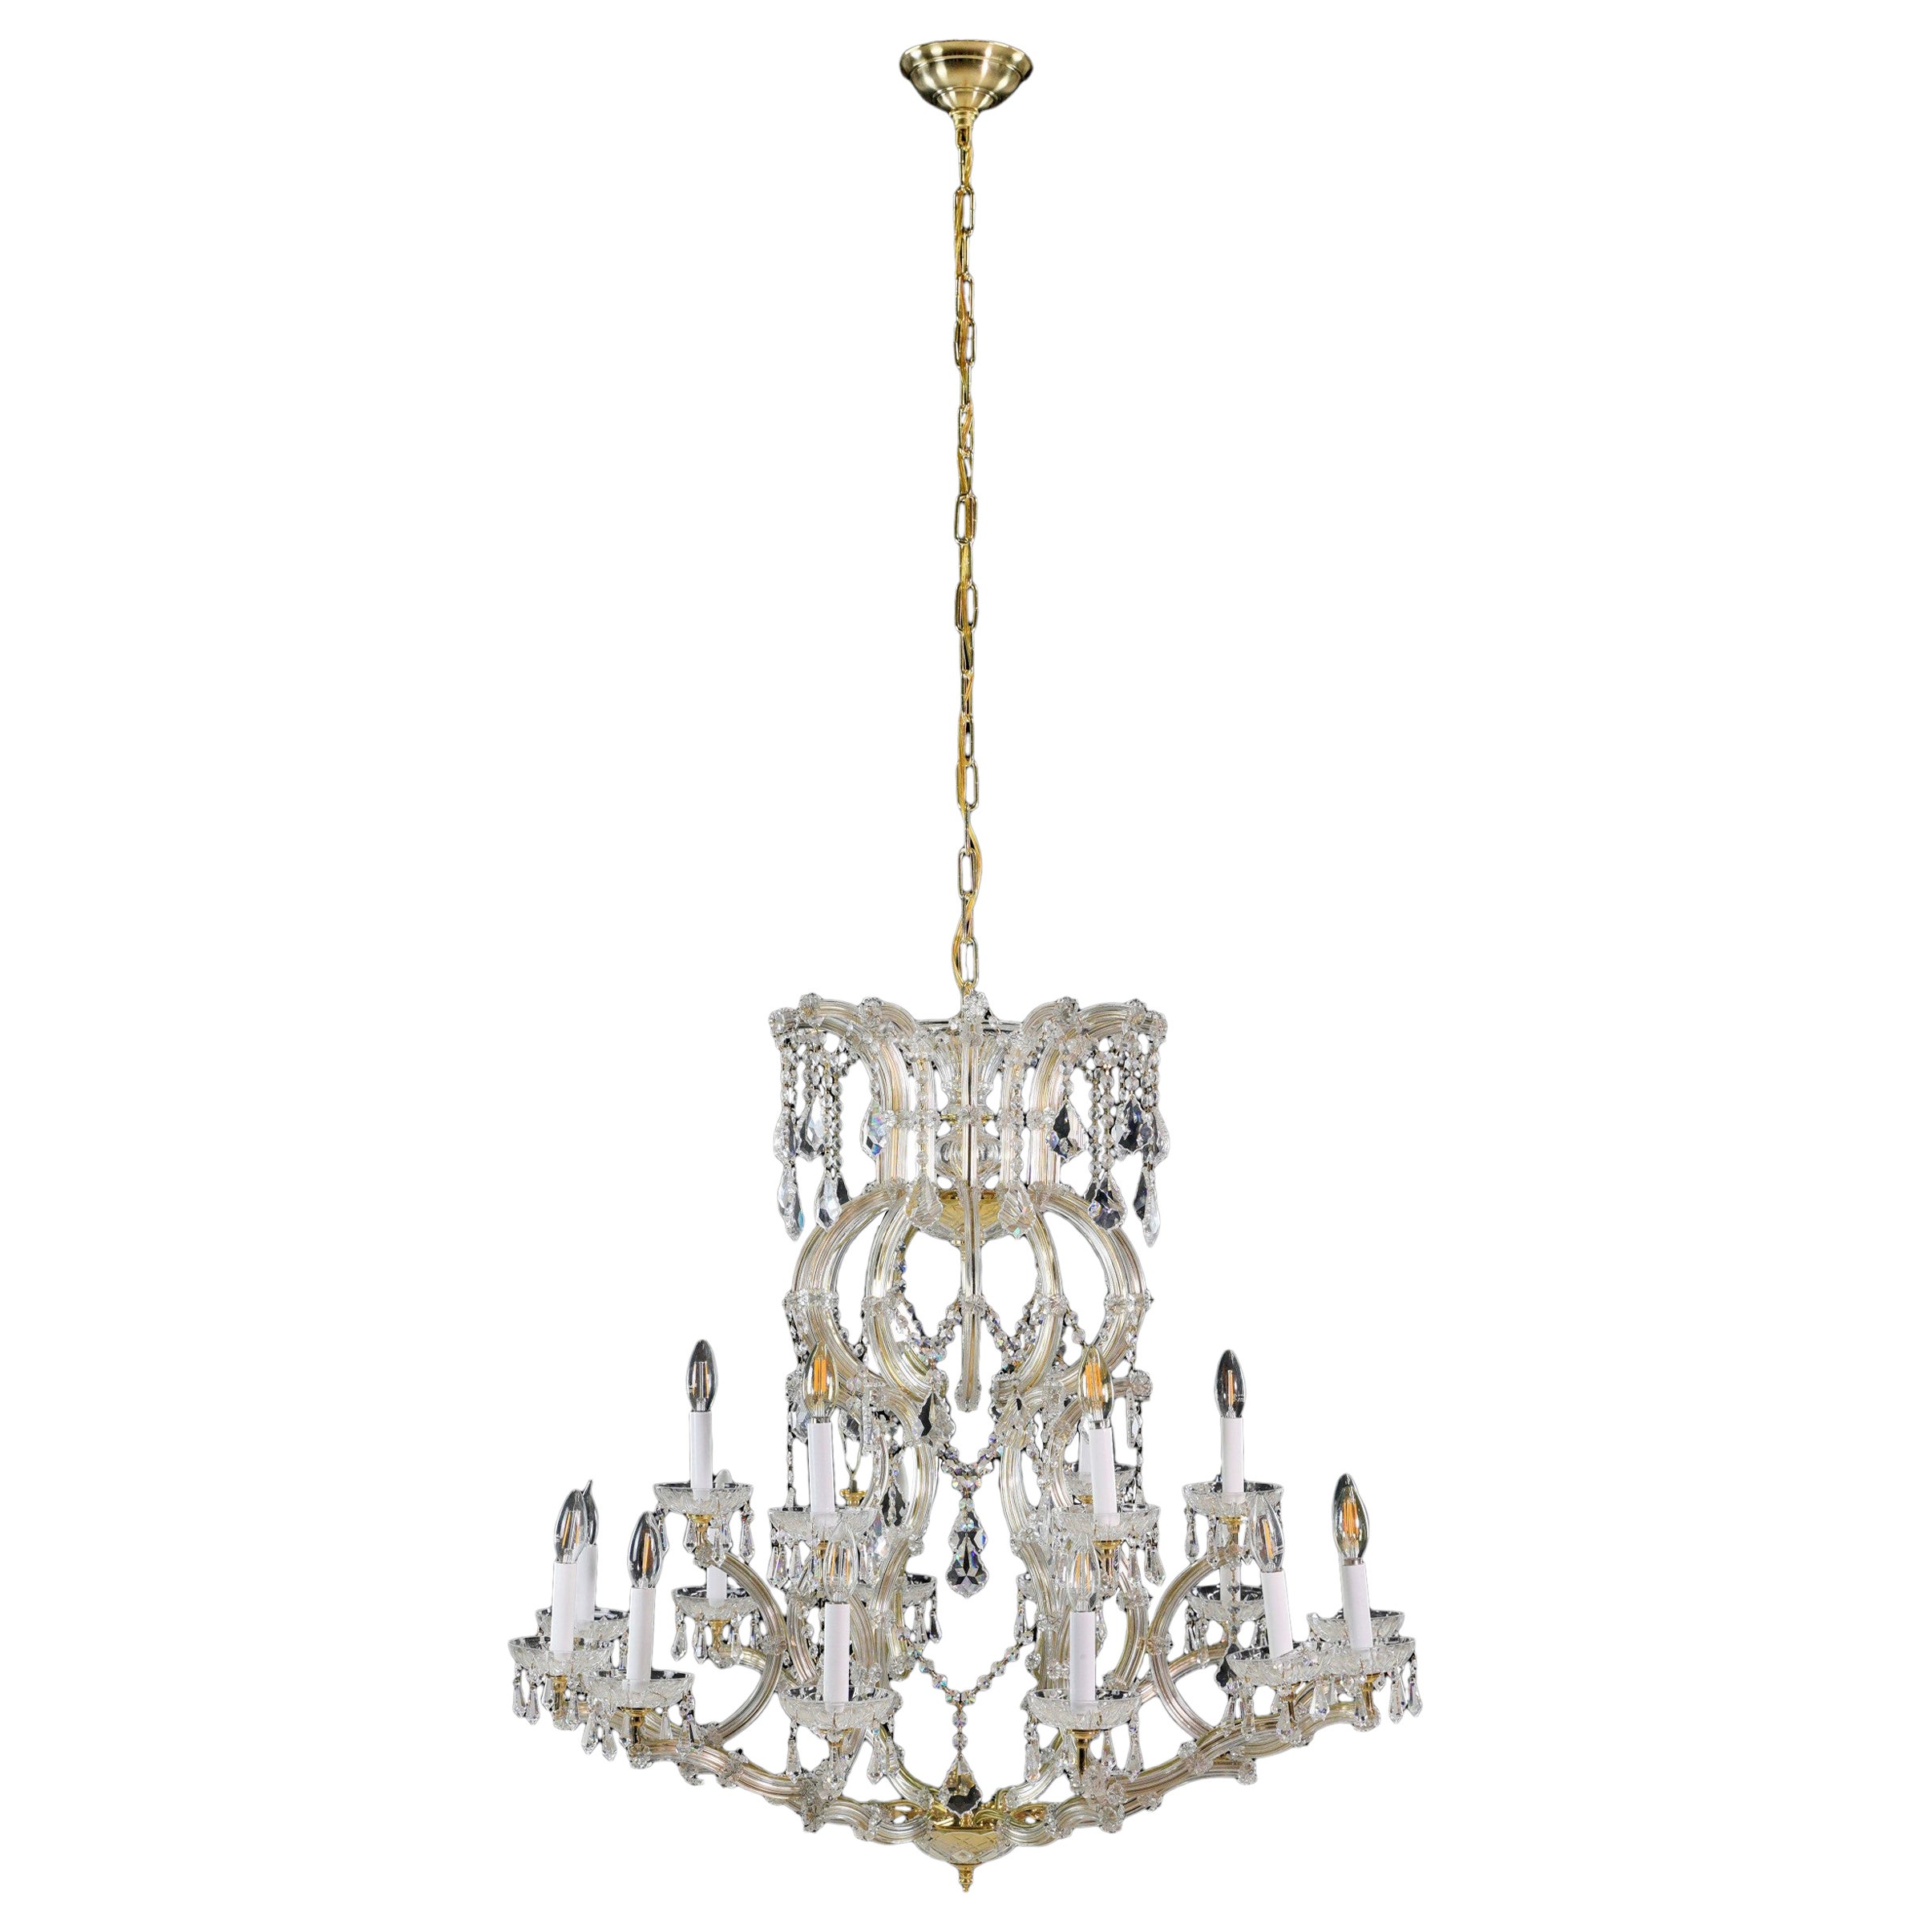 6 Arm 18 Lights Marie Therese Crystal & Brass Chandelier For Sale